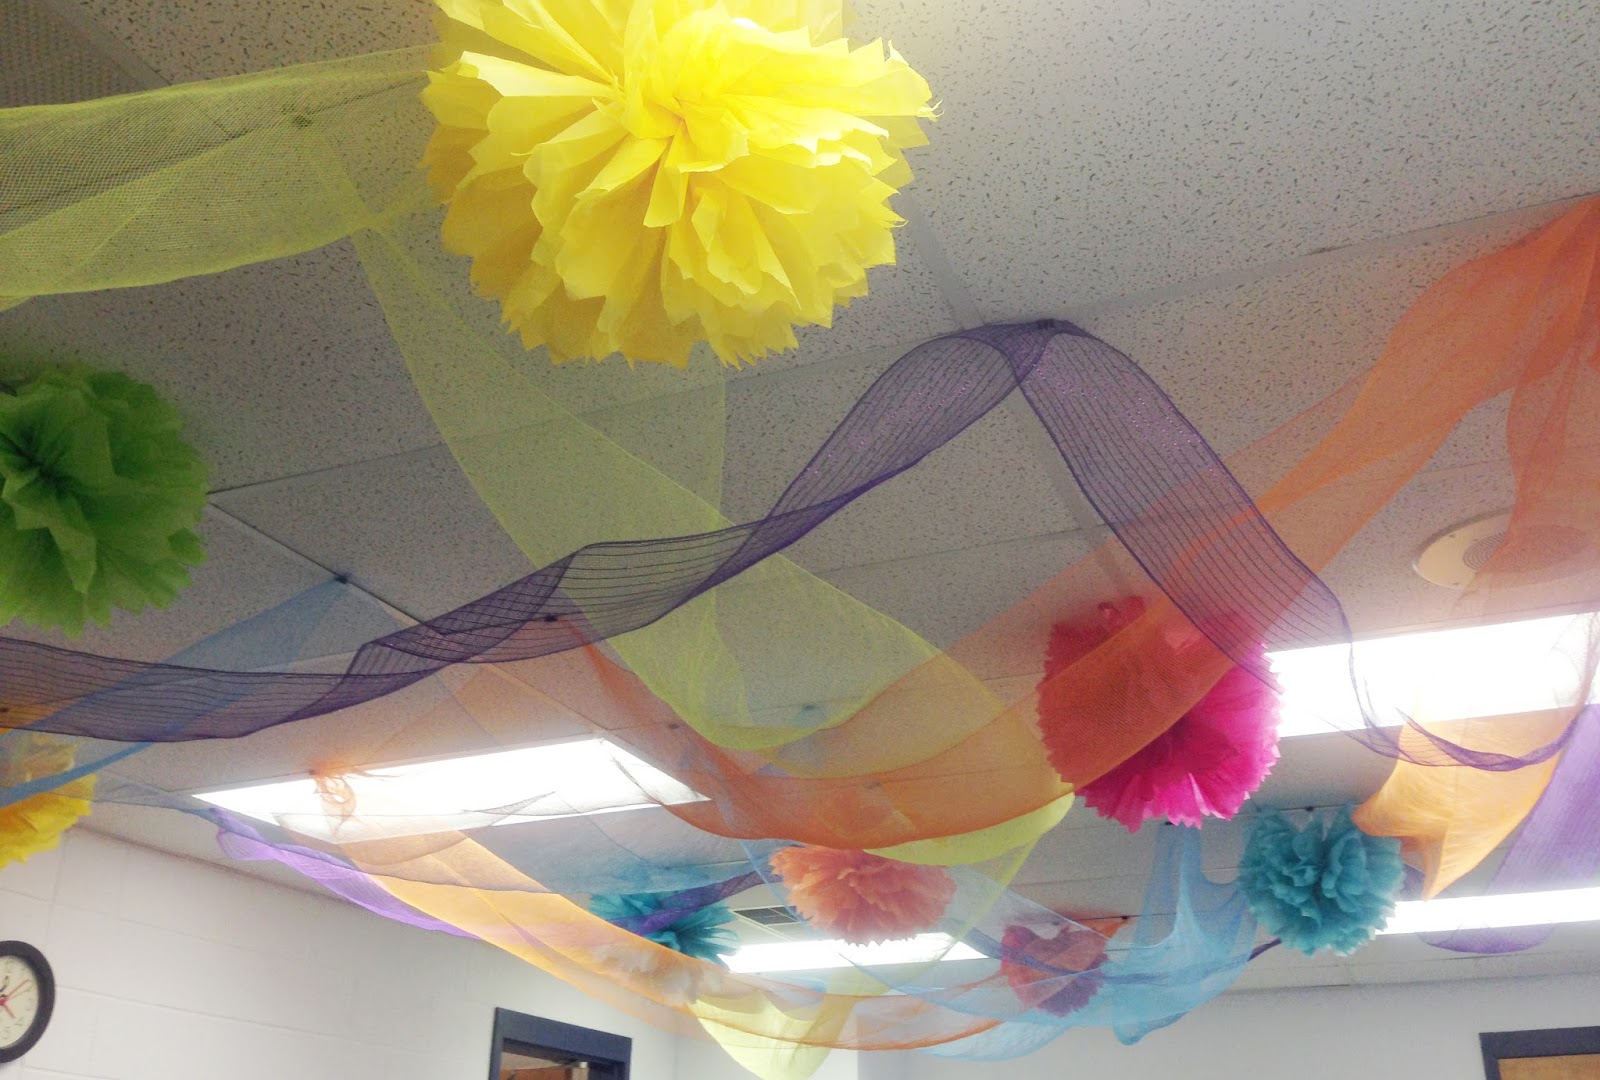 Dancing Commas :: Workshop of Wonders VBS :: Tissue paper pom poms and decorative mesh hung from ceiling